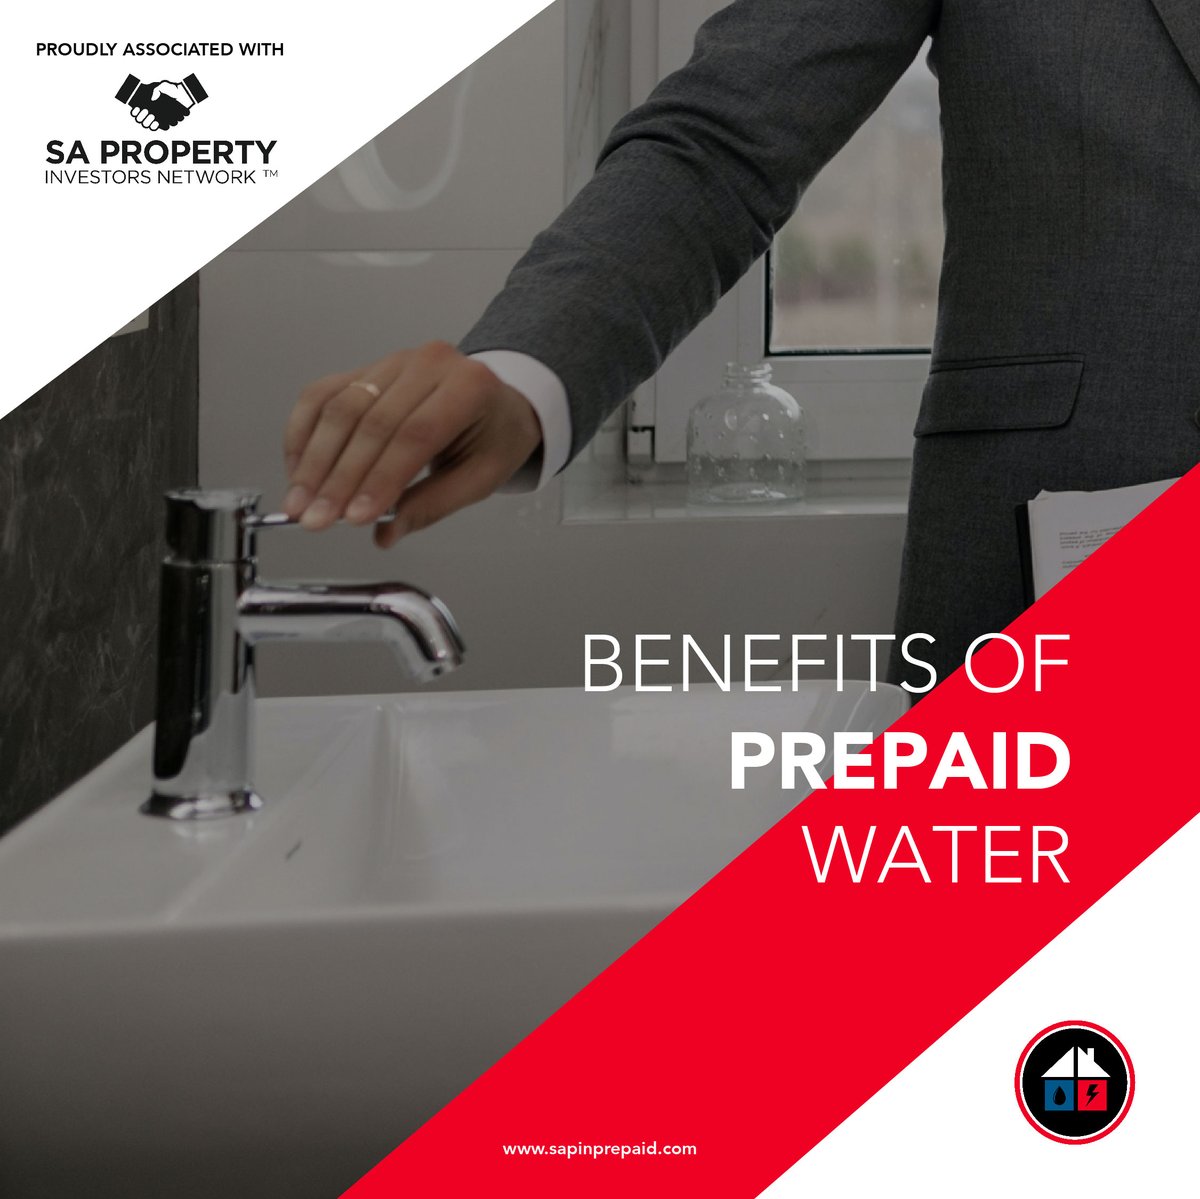 We know that Prepaid Meters have many benefits!

Get in touch with us for more information on how to go about installing a prepaid water meter on your property.

sapinprepaid.com | info@sapinprepaid.com

#SAPINPrepaid #sapropertynetwork #SAPIN #PrepaidWater #LinkInBio